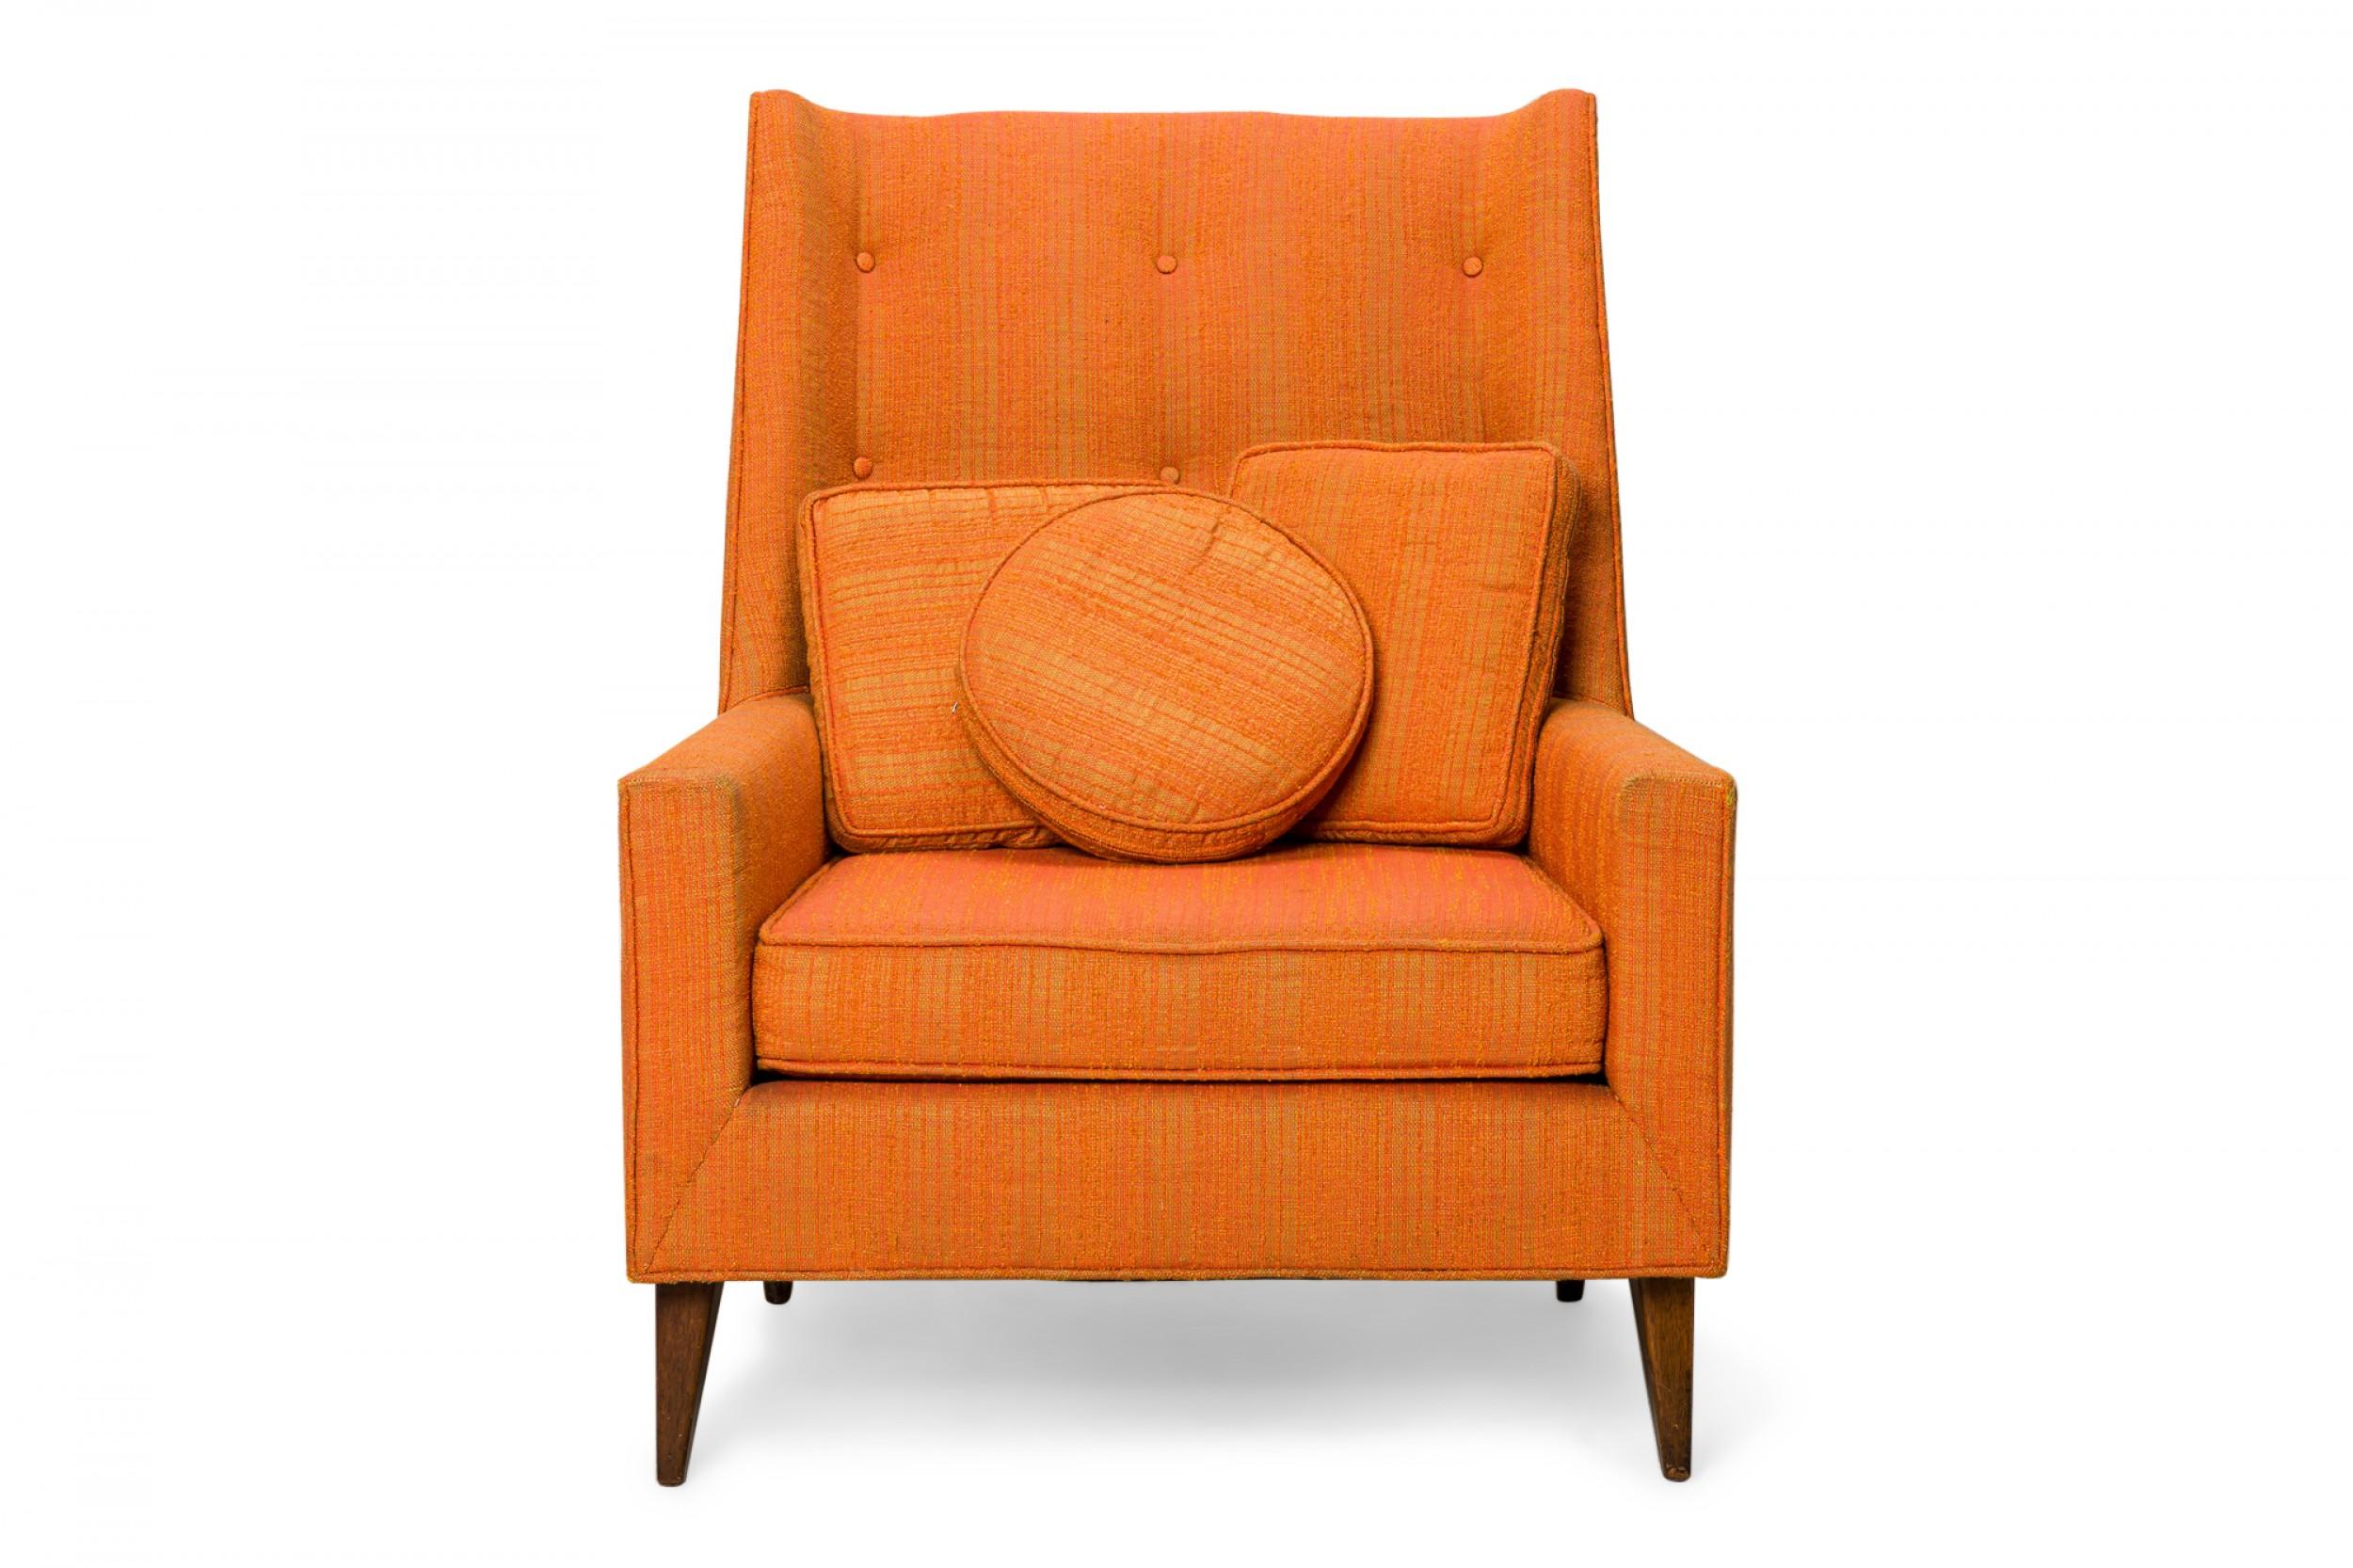 20th Century Harvey Probber Tall Back Orange Fabric Upholstered Arm / Lounge Chair For Sale